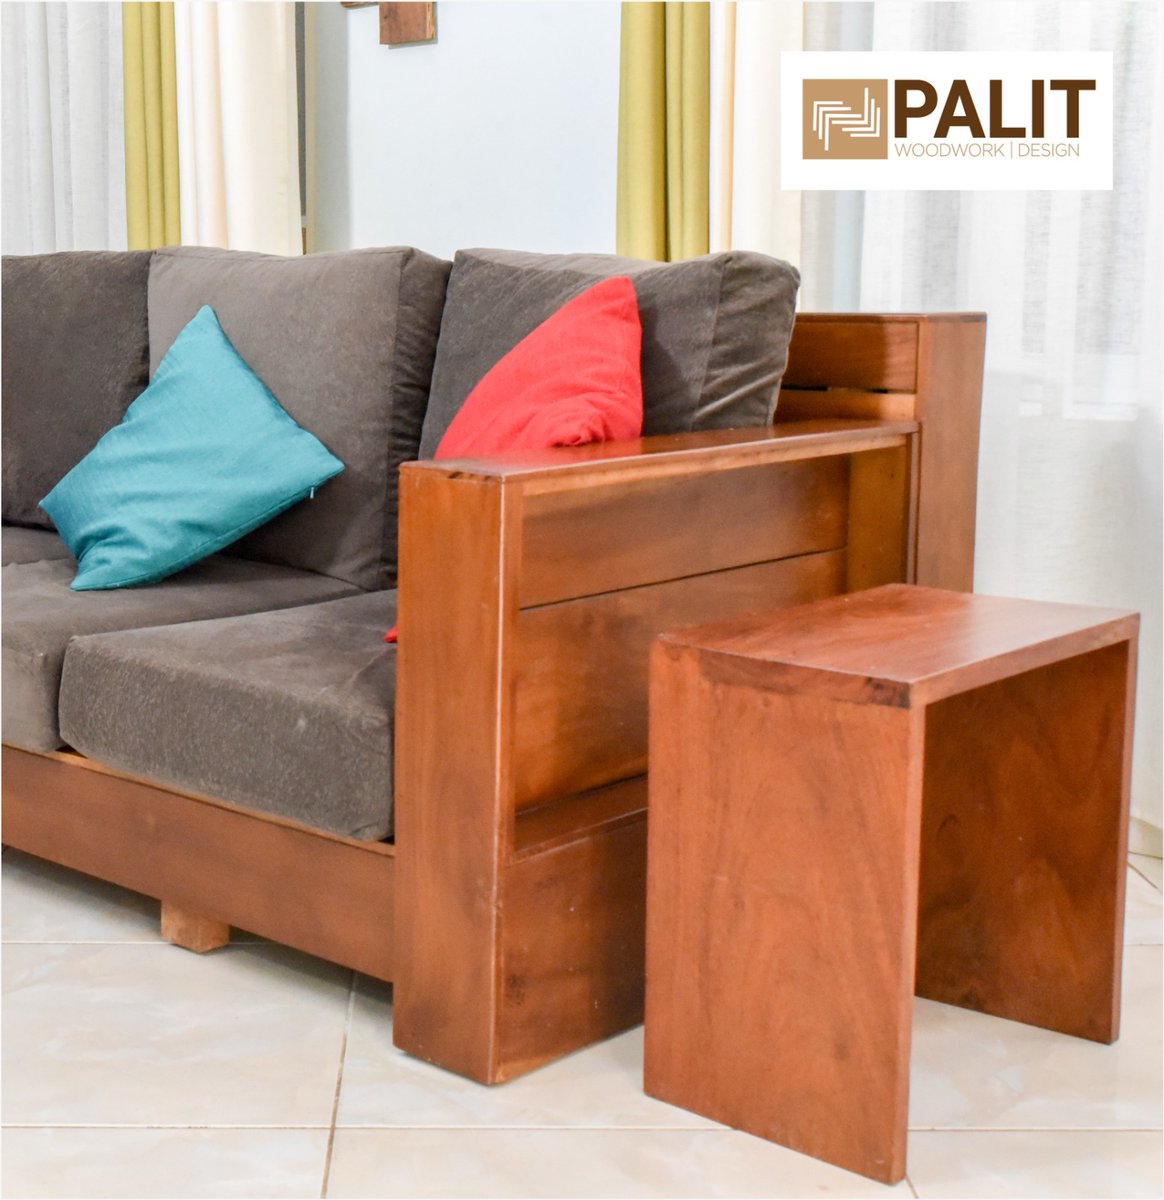 Can you see this in your spaces? Our hardwood sofa & side table set with sleek, angular design from the PALIT #WOODWORK #FURNITURE SHOP in Makindye on 0775000316 | 0755702085 ! 🛠️🪵  #woodenfurniture #woodendecor #woodenaccessories